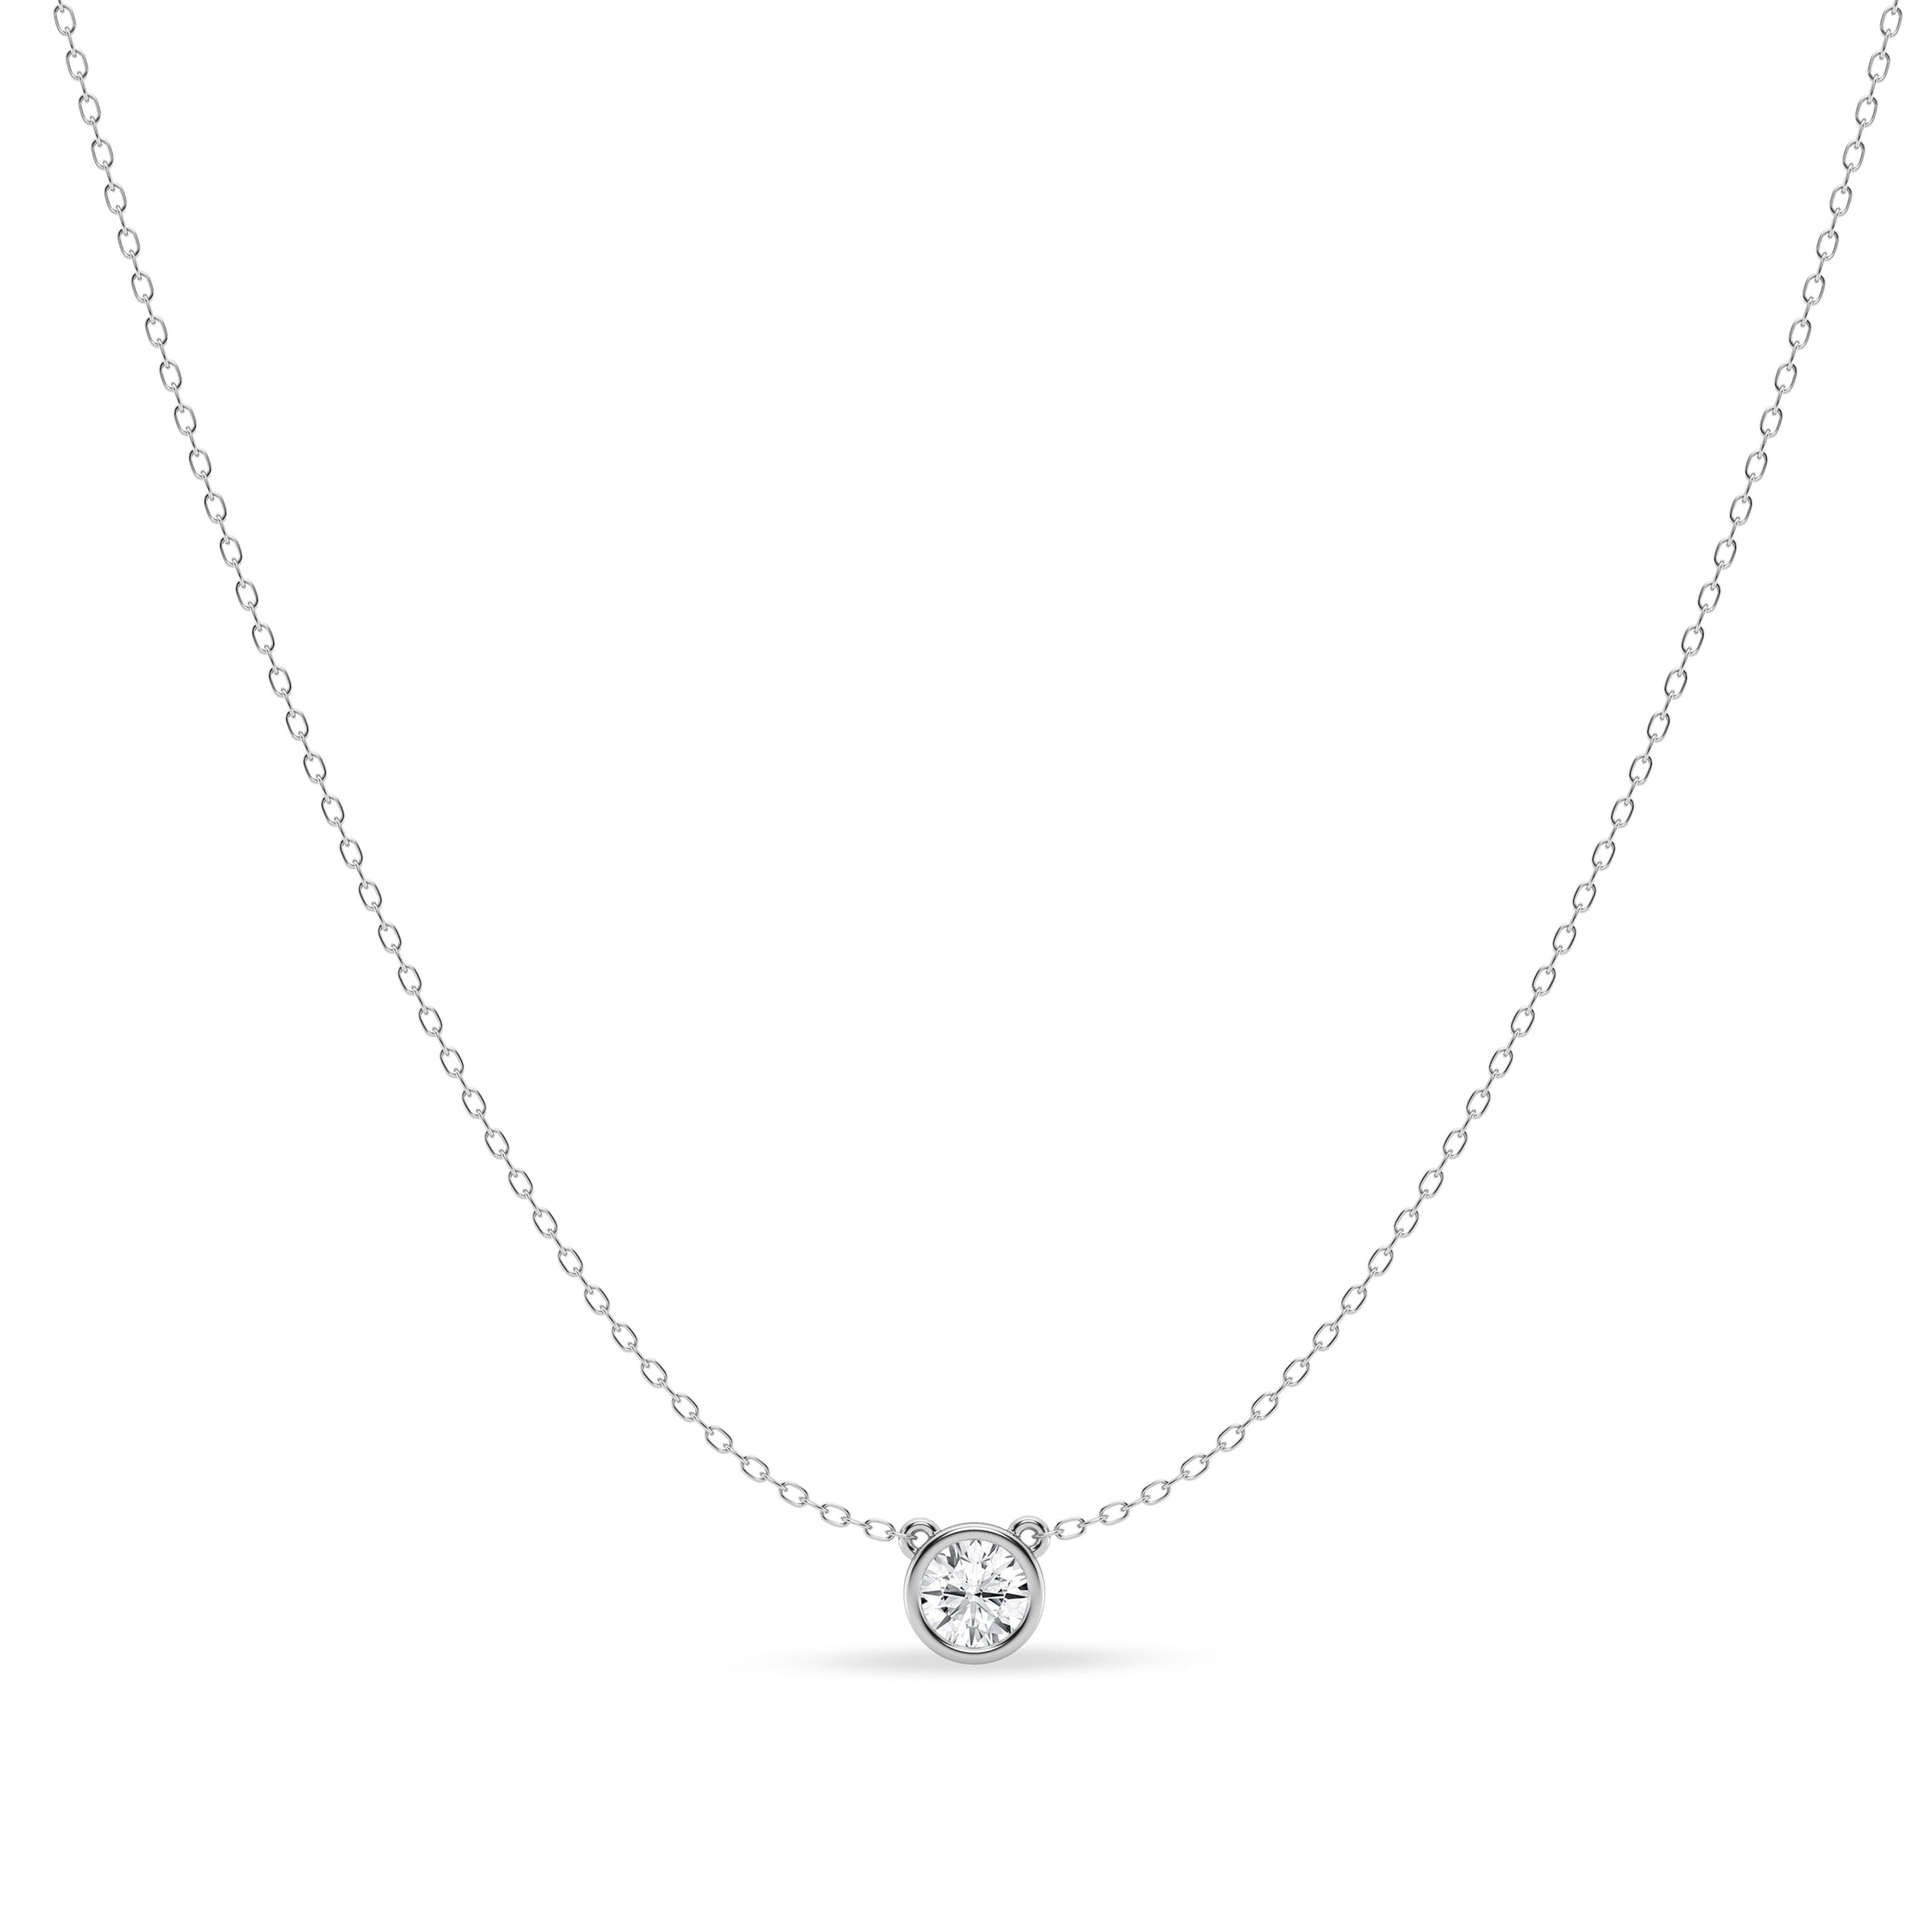 Mirage Slider Necklace with 1/2ct of Laboratory Grown Diamonds in Sterling Silver and Platinum Necklaces Bevilles 